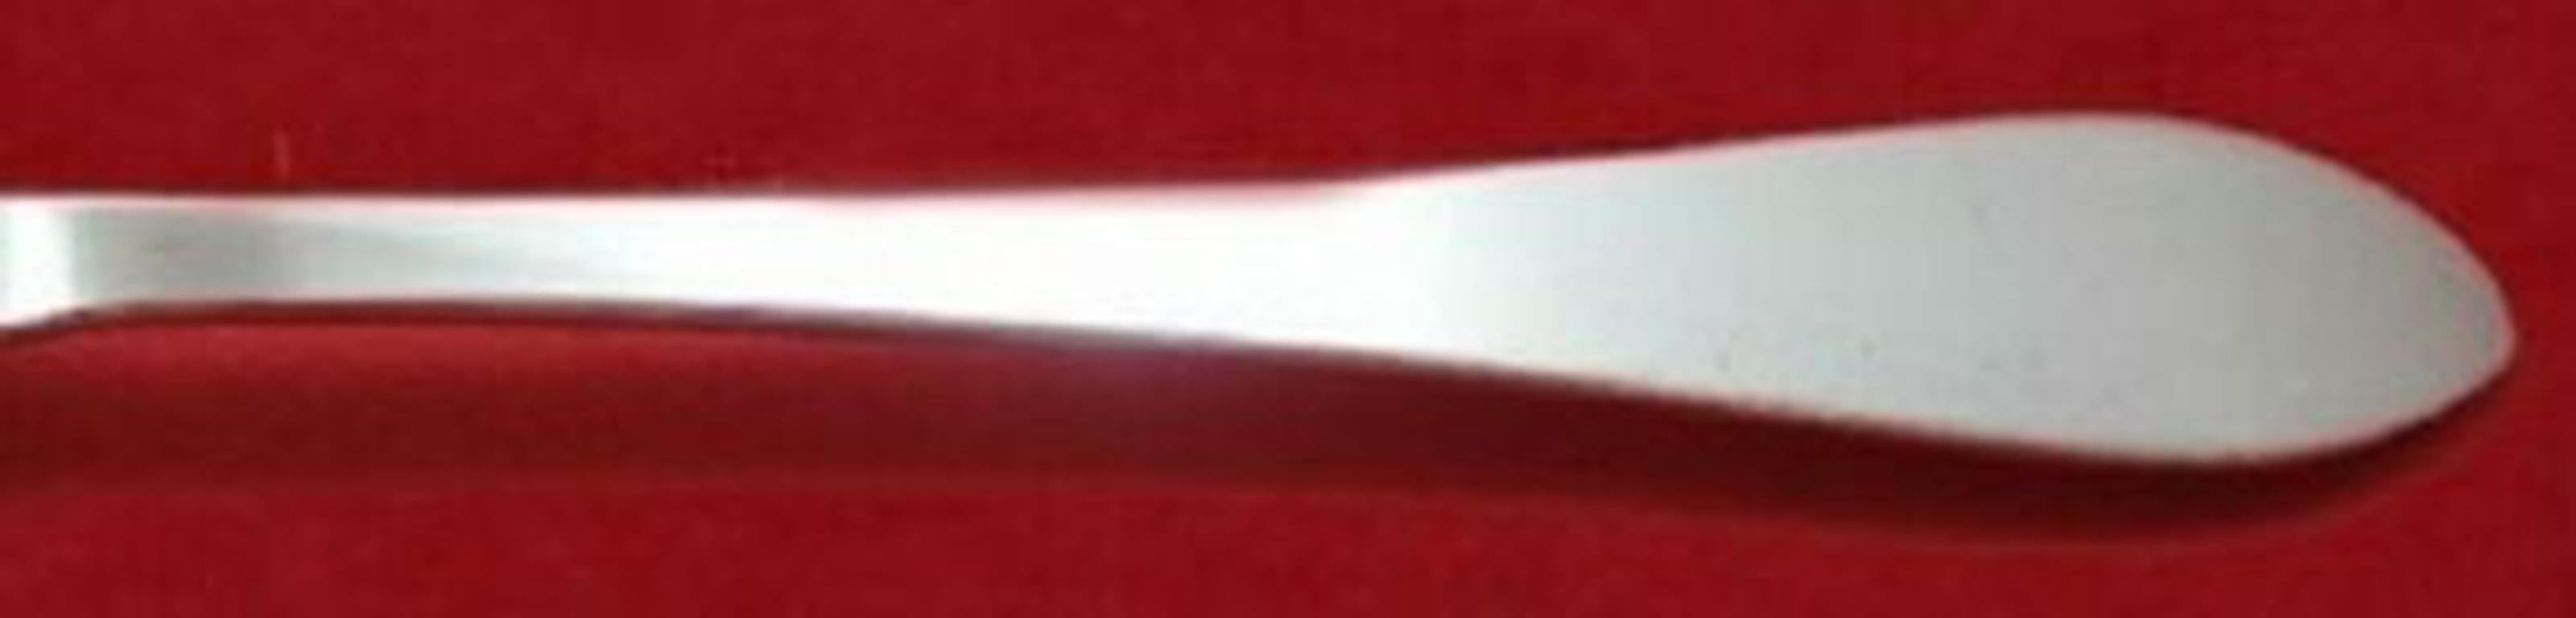 Sterling silver place soup spoon, 7 1/4